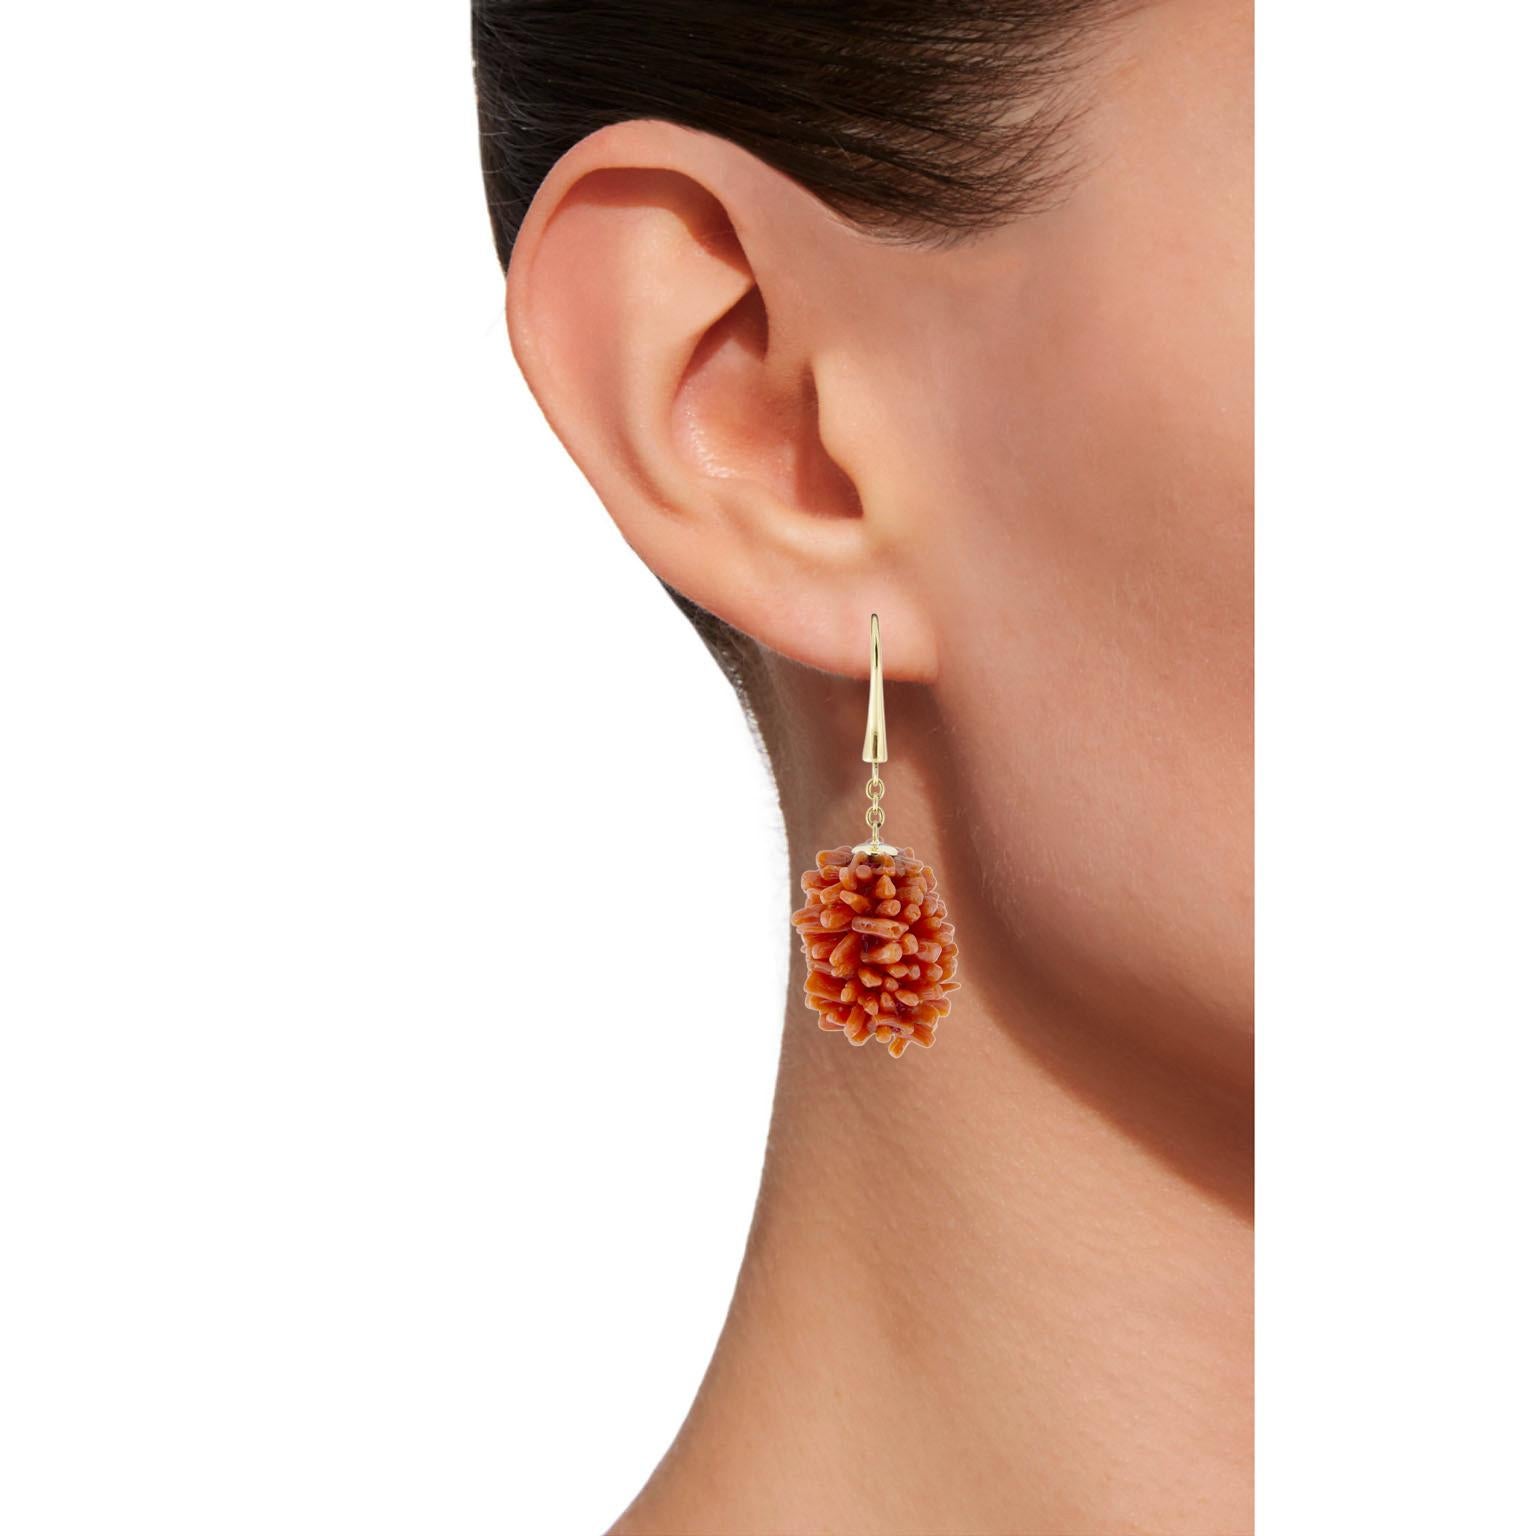 Jona design collection, hand crafted in Italy, 18 karat yellow gold dangle coral pendant earrings. 
Dimensions : L 1.84 in x Diameter 0.70 in - L 4.6 cm x Diameter 17.49 mm
All Jona jewelry is new and has never been previously owned or worn. Each